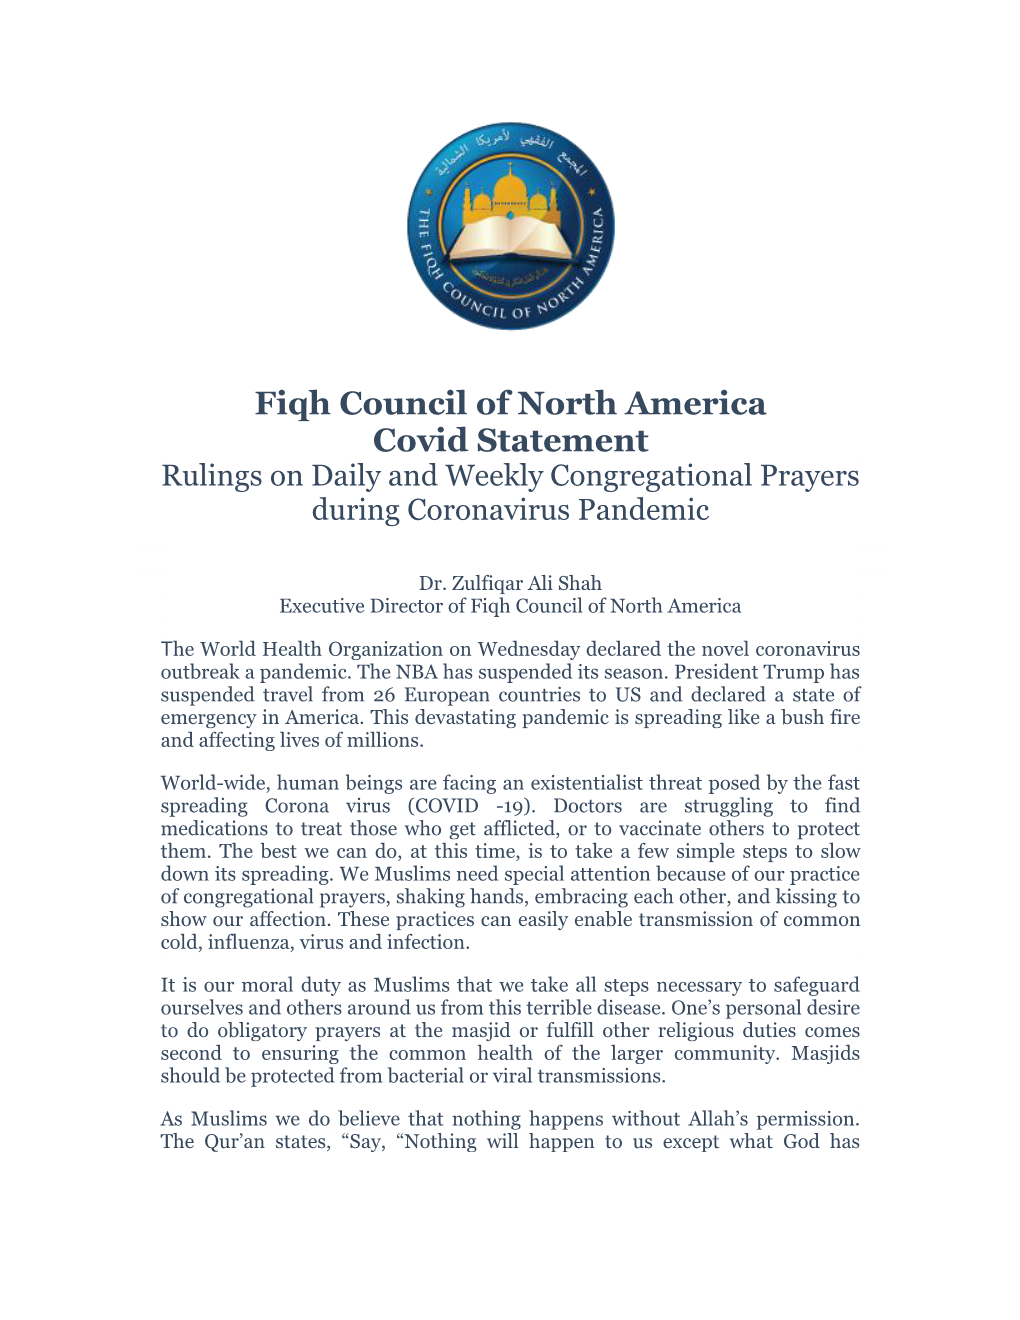 Fiqh Council of North America Covid Statement Rulings on Daily and Weekly Congregational Prayers During Coronavirus Pandemic